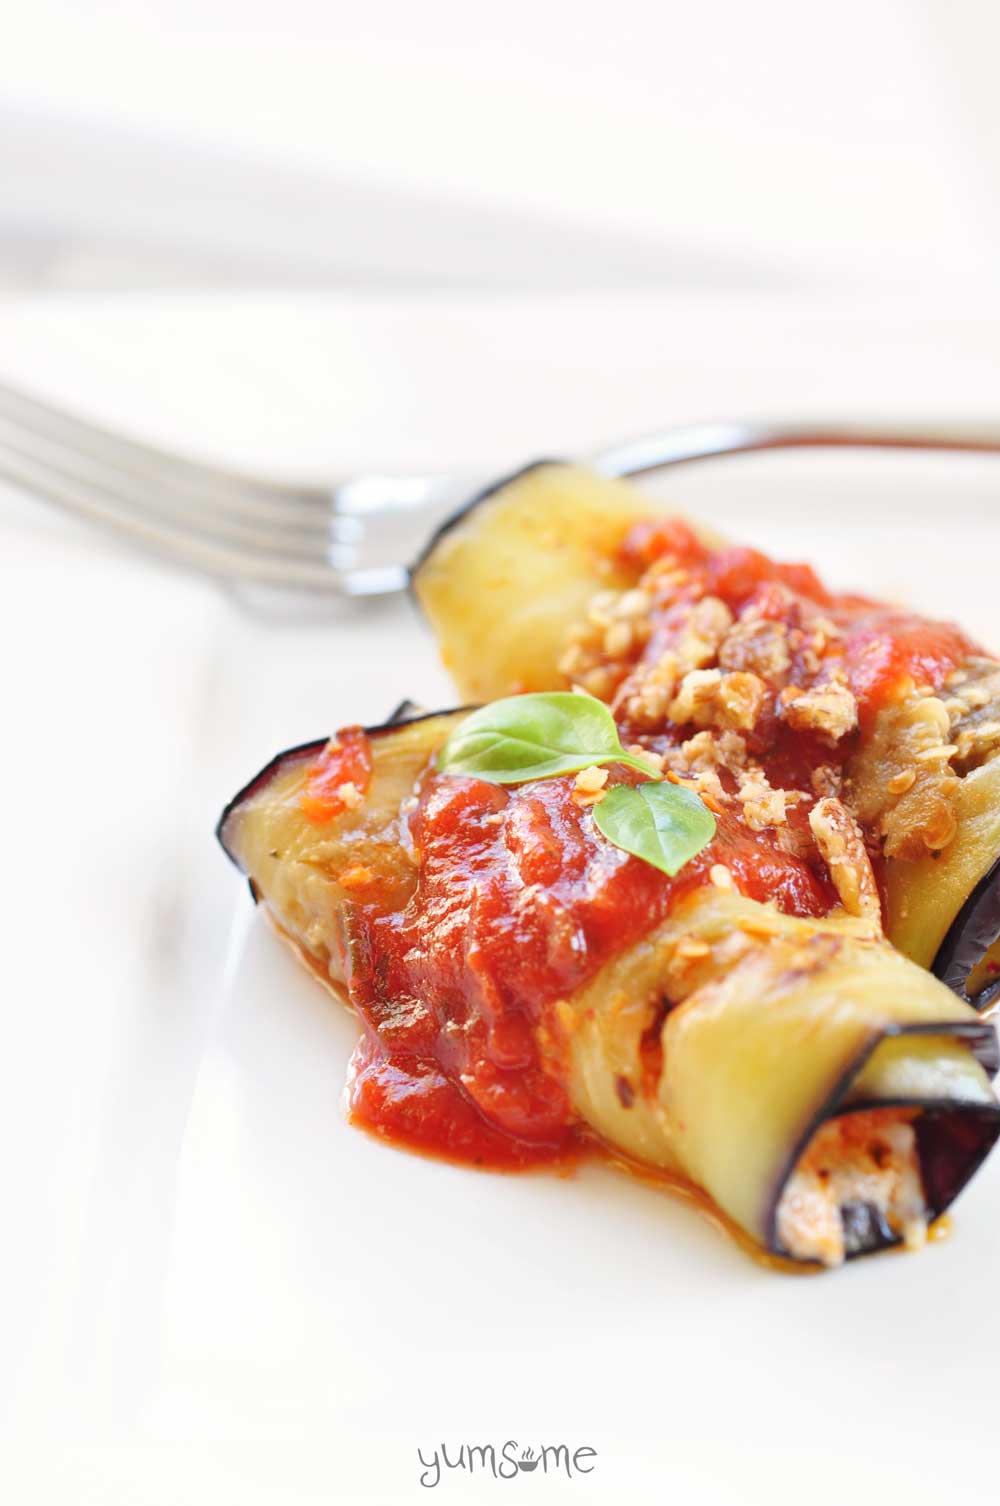 You won't go wrong with my vegan eggplant roll-ups - a delicious baked combination of creamy aubergine, tomato, and tangy vegan ricotta. | yumsome.com